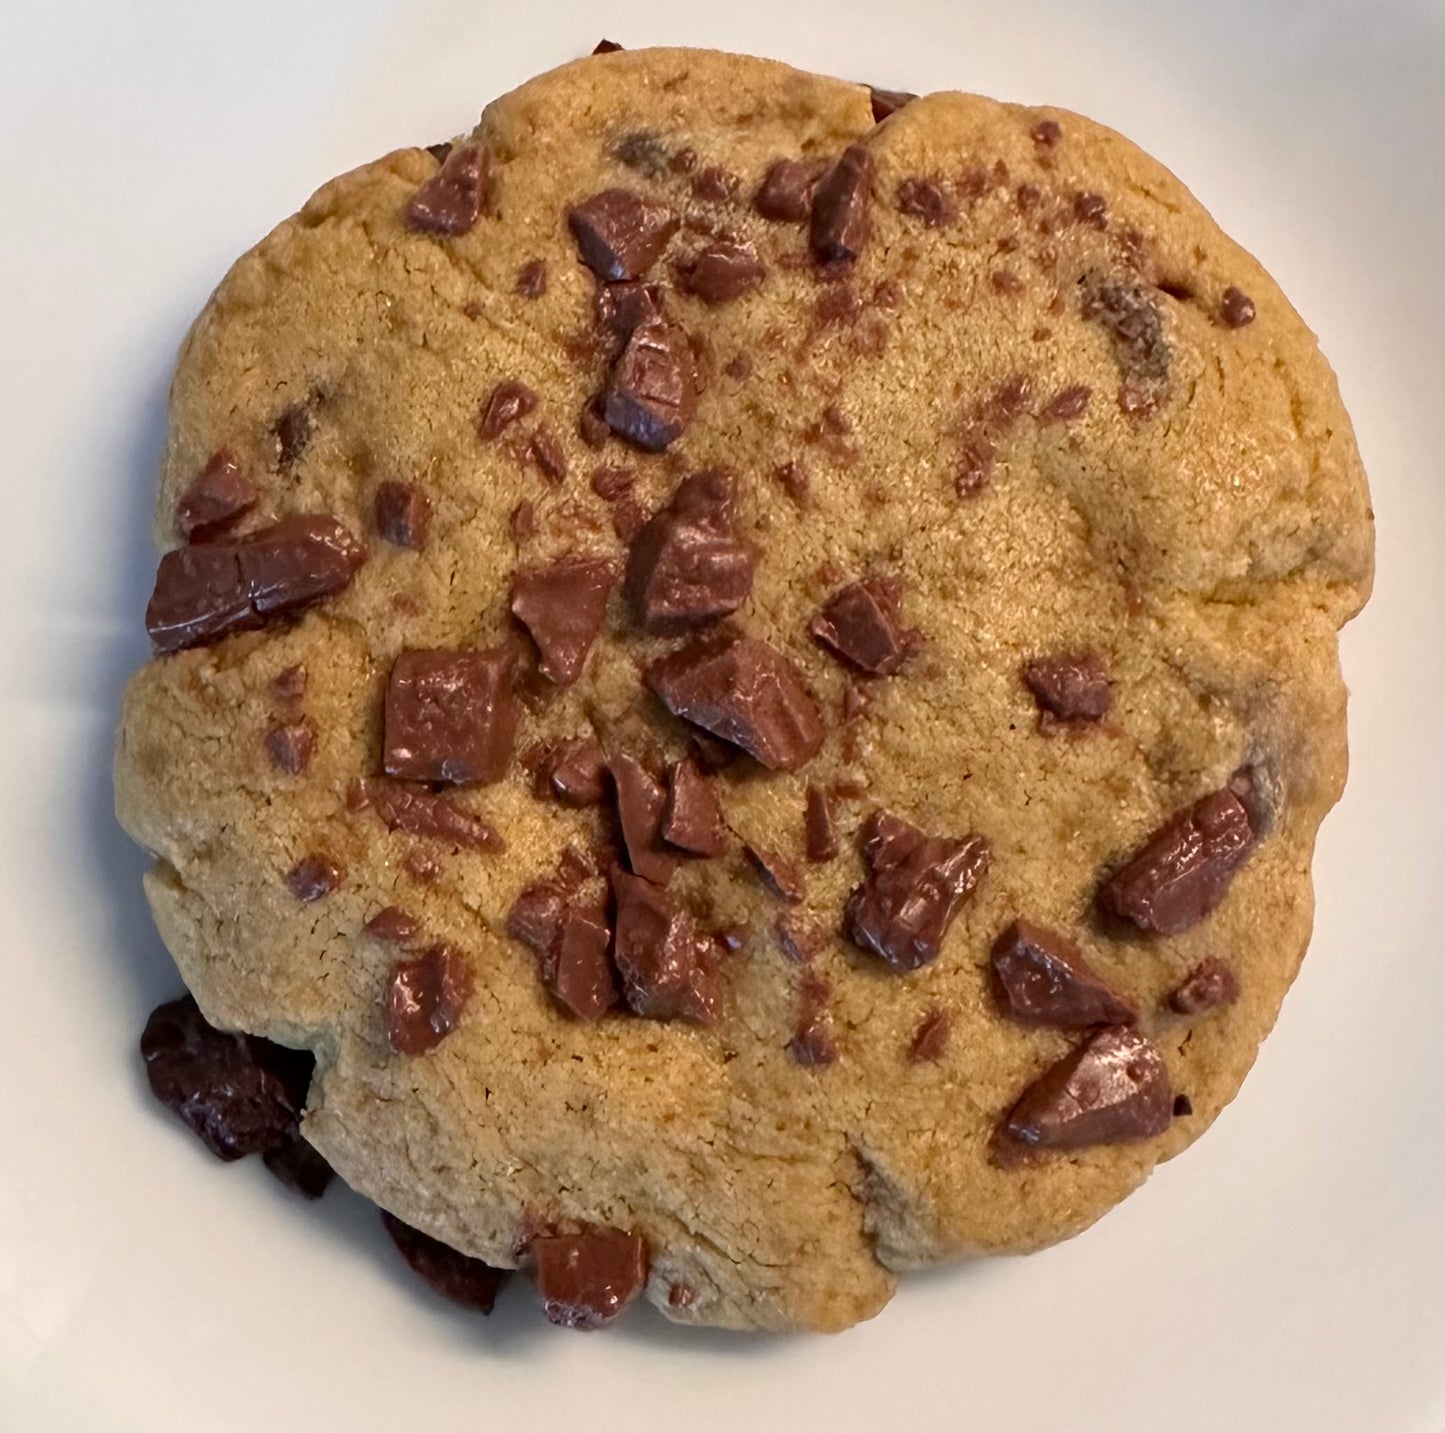 "In the beginning" (Chocolate Chip Cookie) 20mg